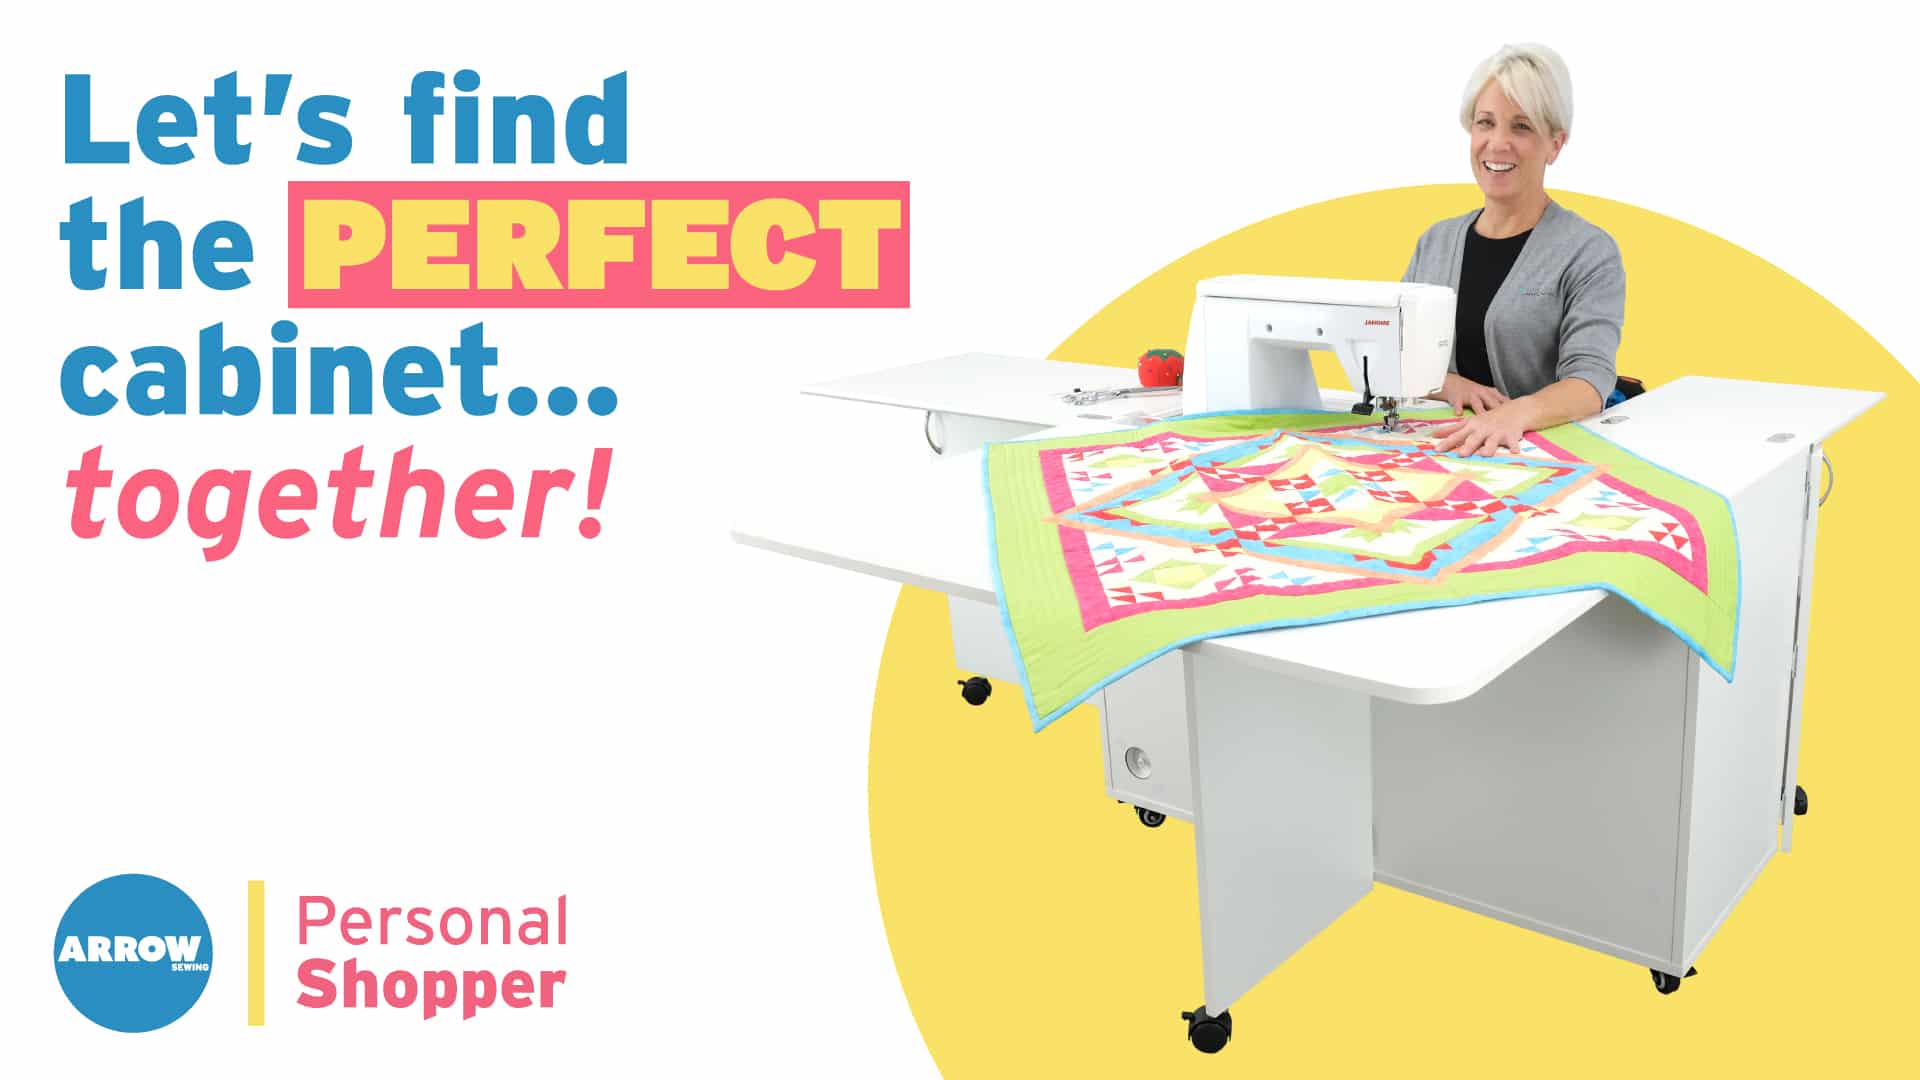 Let's find the perfect sewing cabinet together! Arrow Sewing's Personal Shopper Consultant is here to help you sew in comfort.